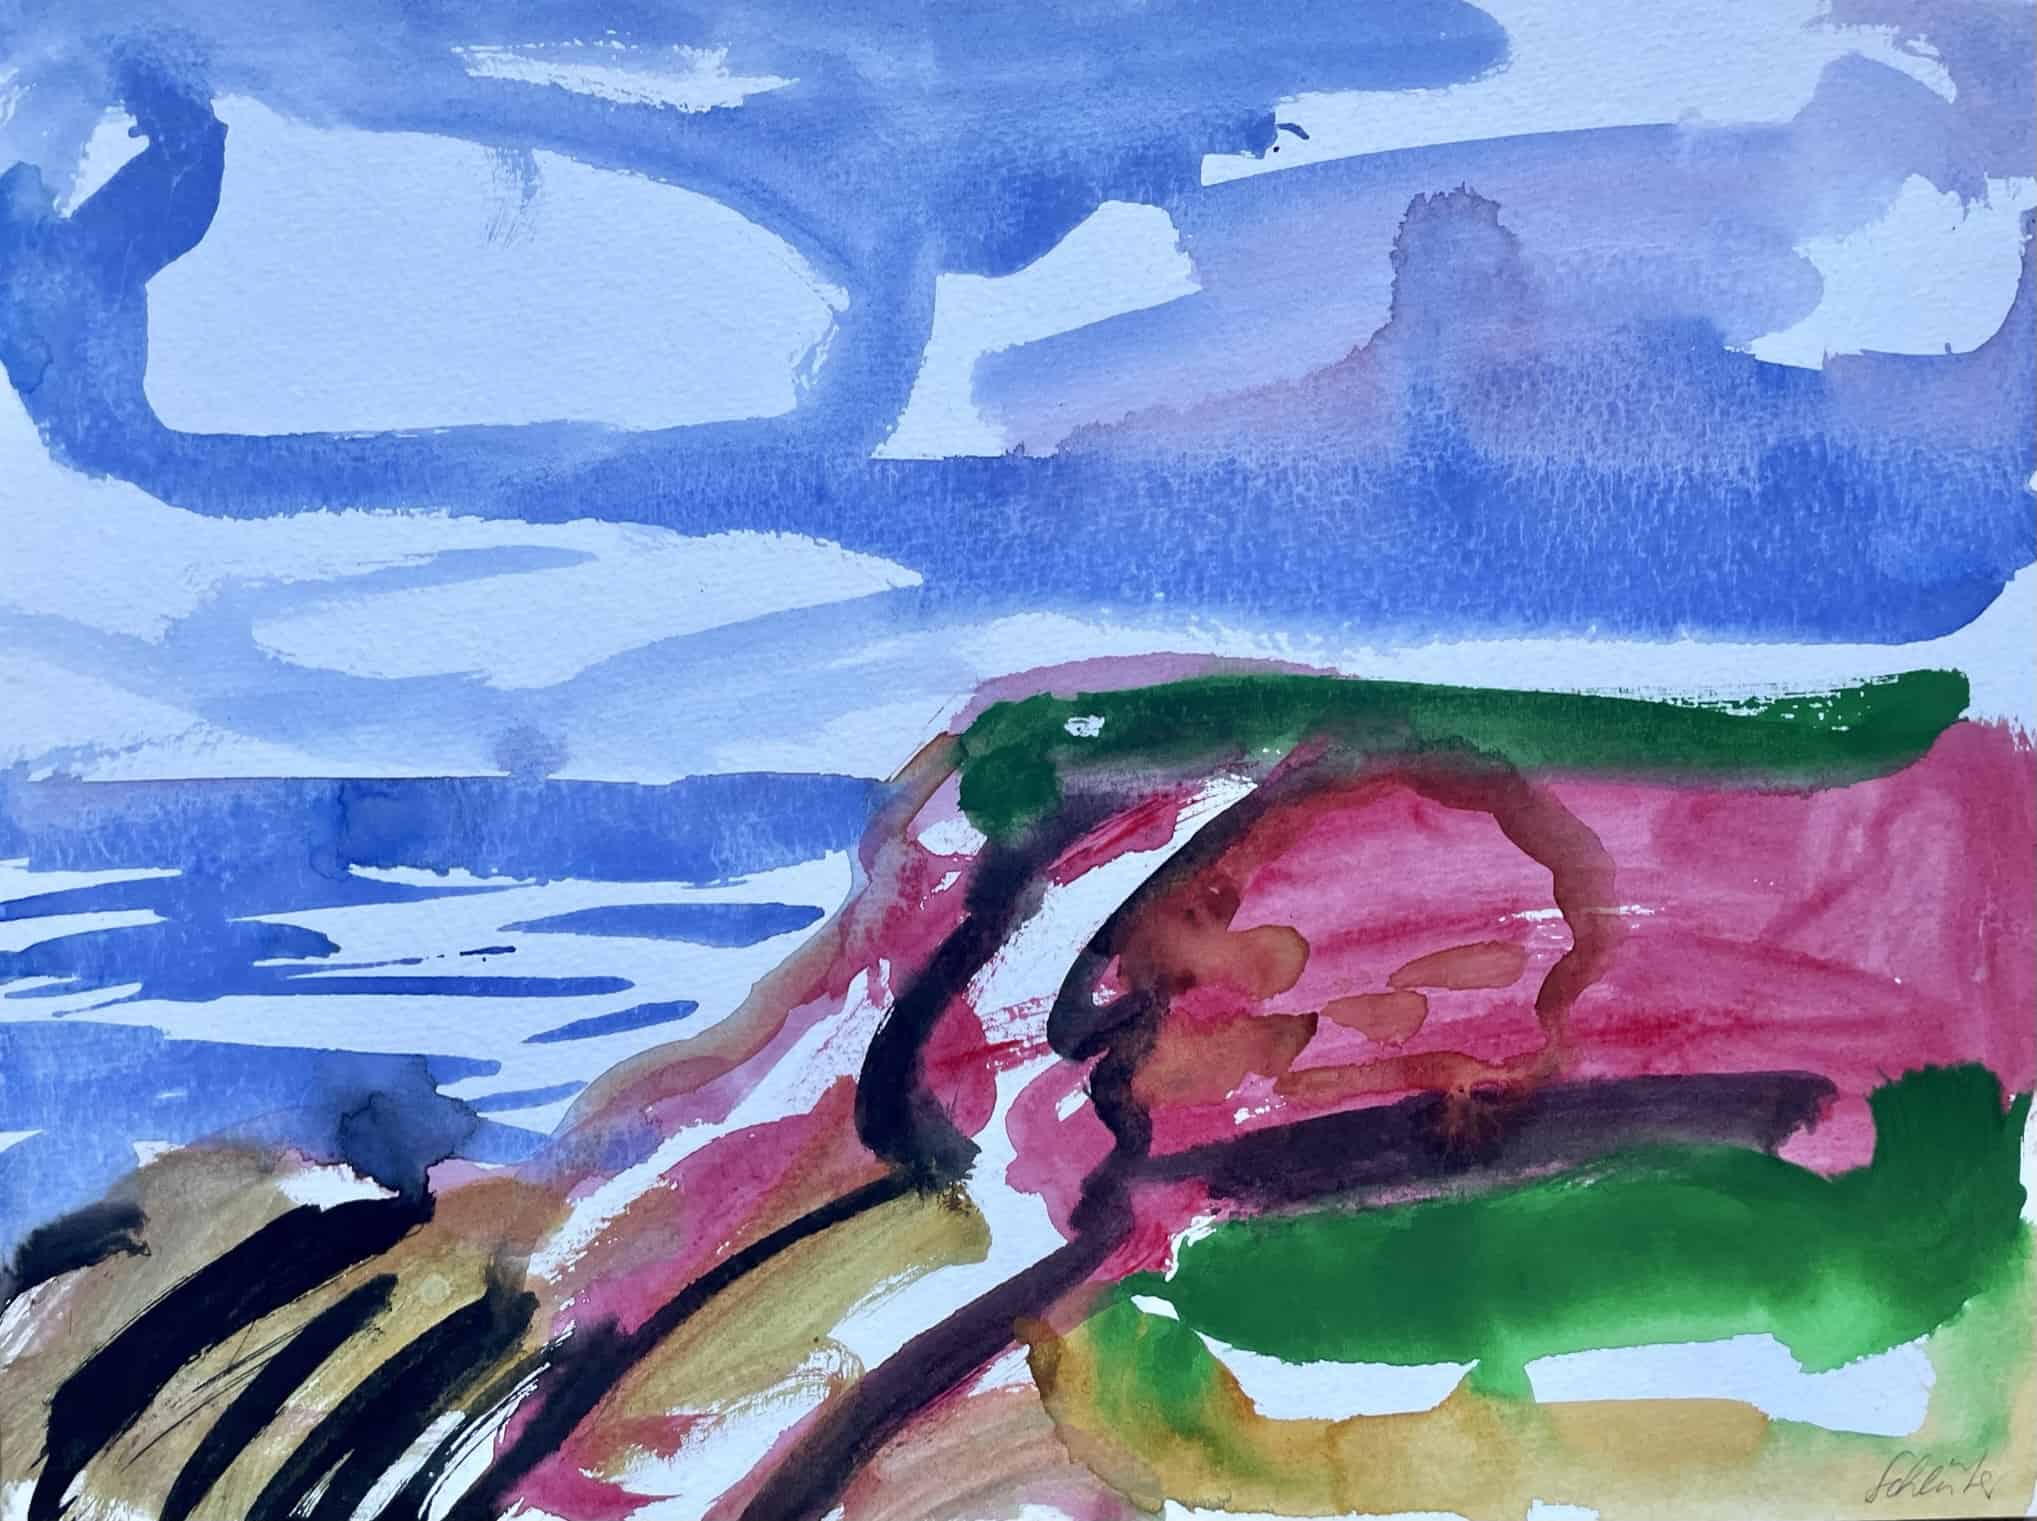 Wolfgang Schlüter. On the dune (2015). Watercolor. 30 x 40 cm.